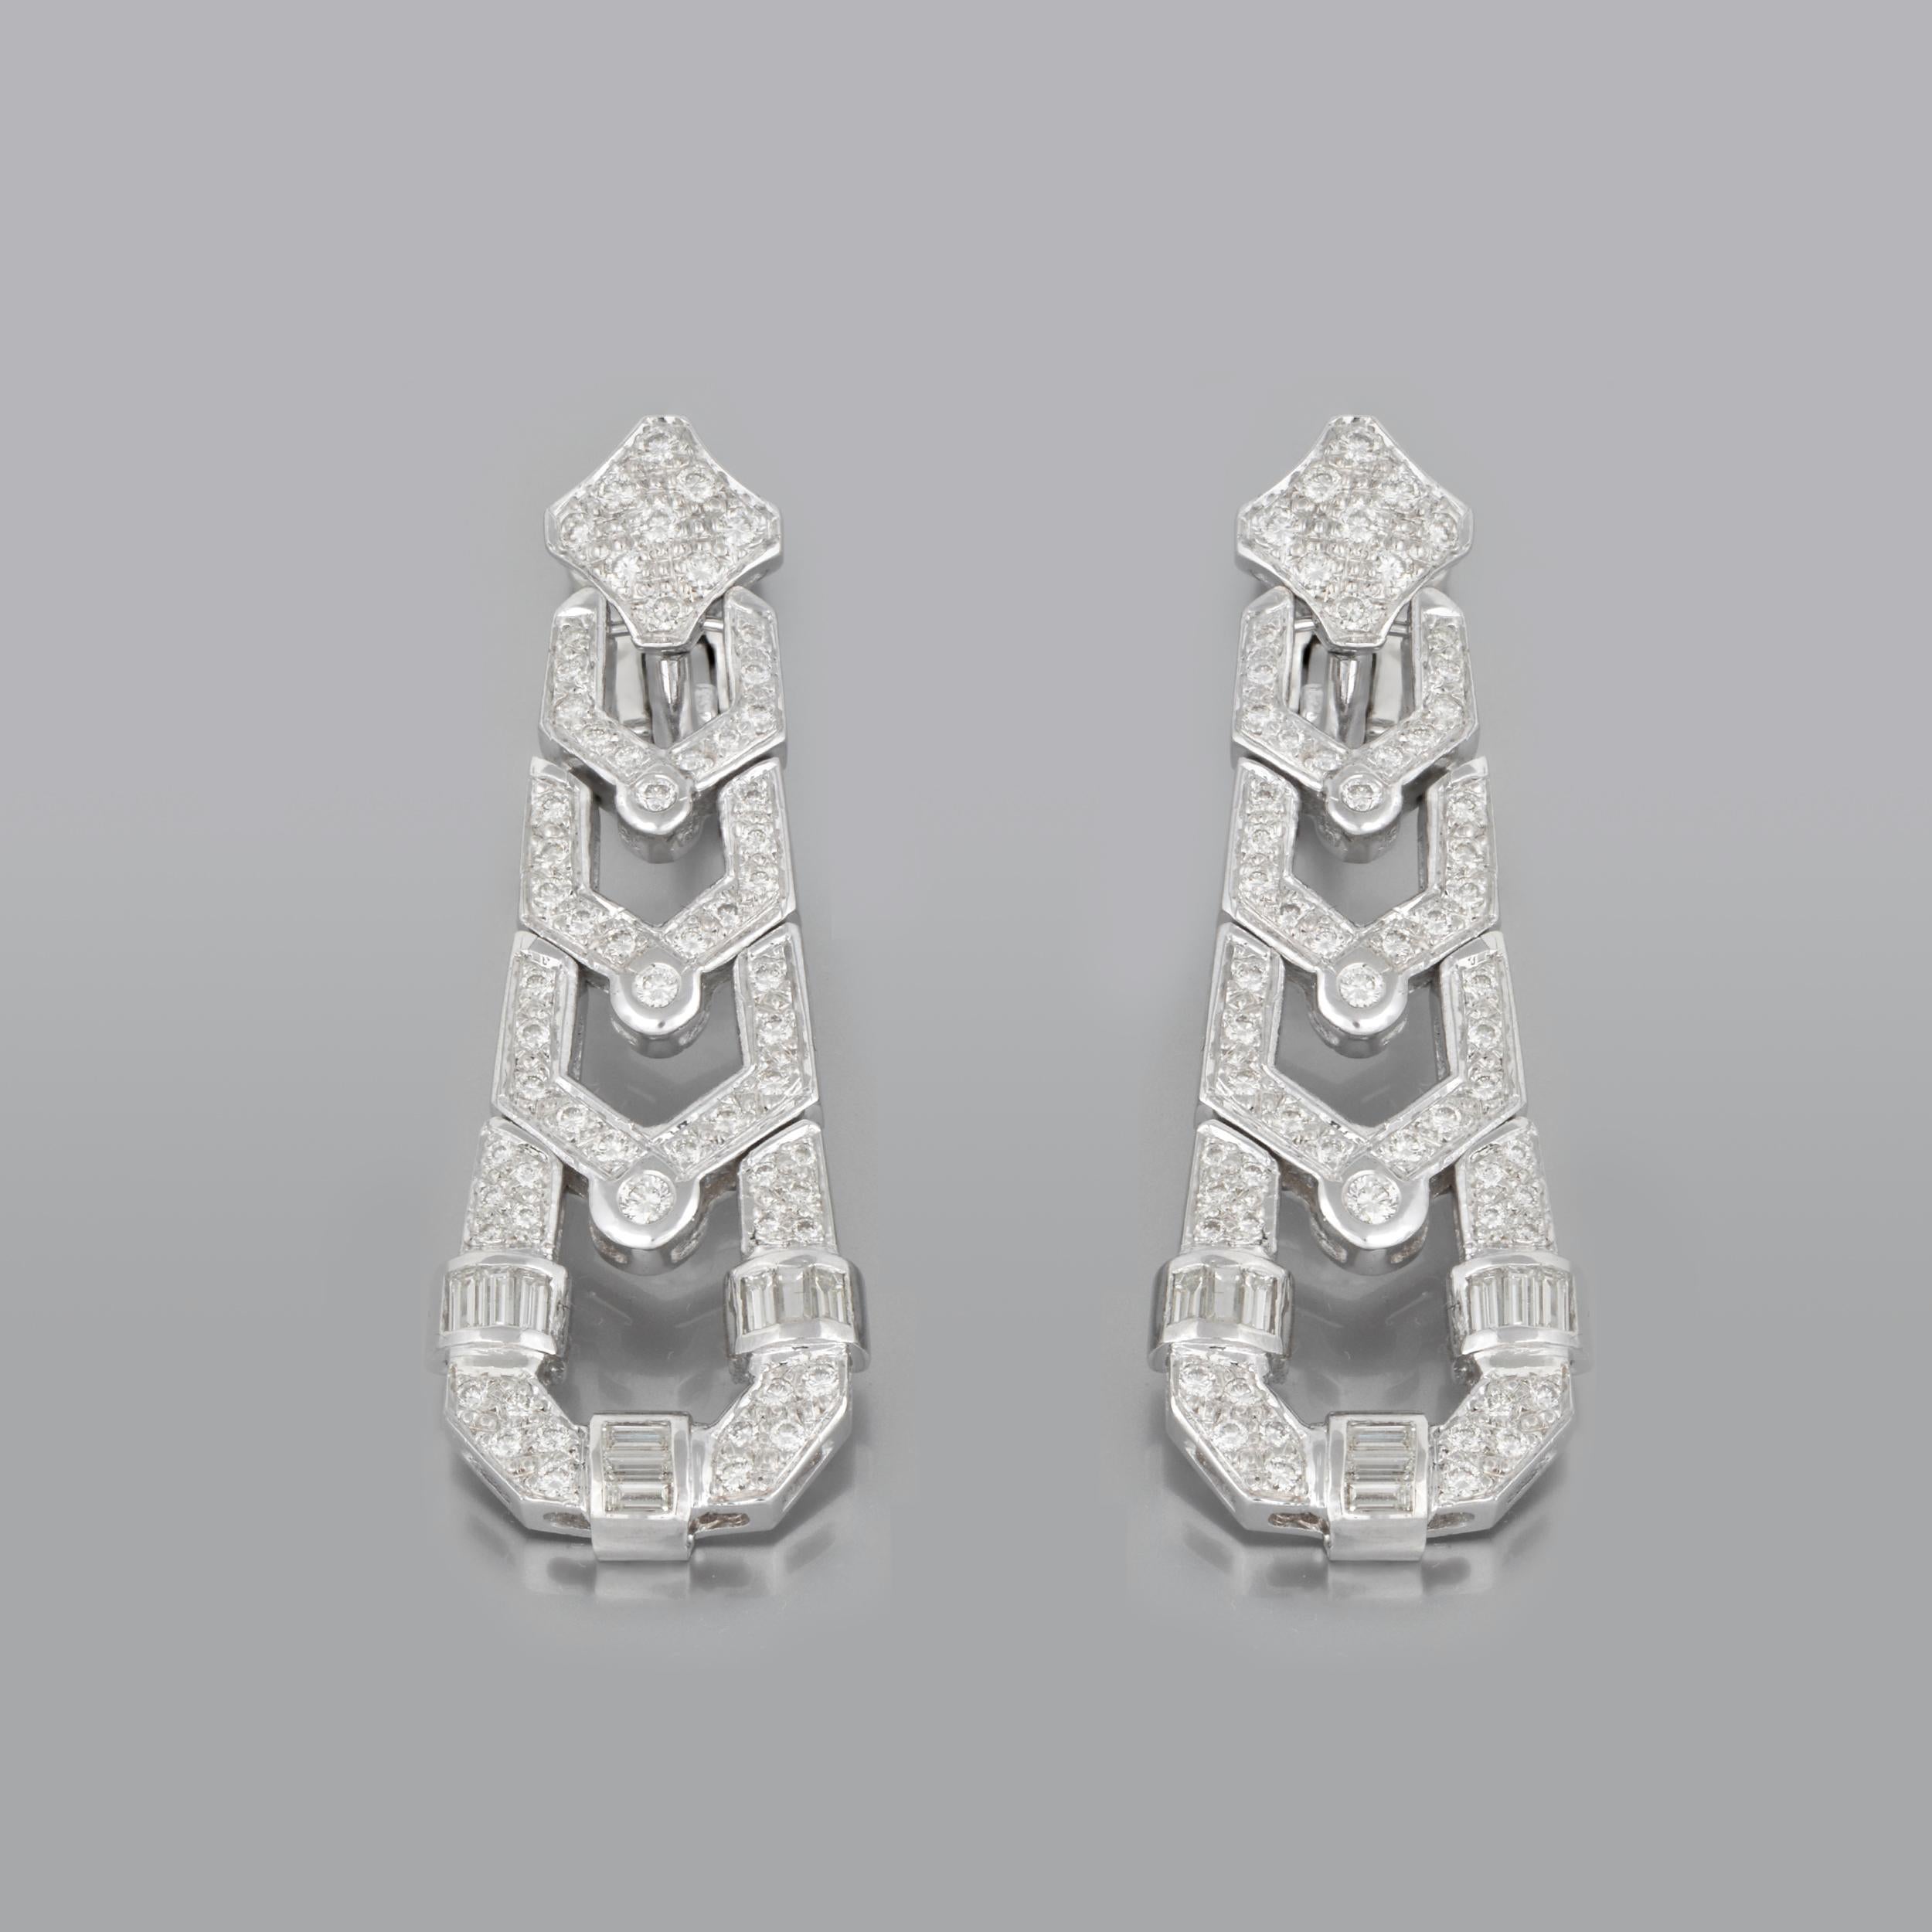 18 k White Gold
Diamonds: 4 ct
Round Baguette Diamonds
Made during Art Deco Period
Made in France
Weight: 23 gr.